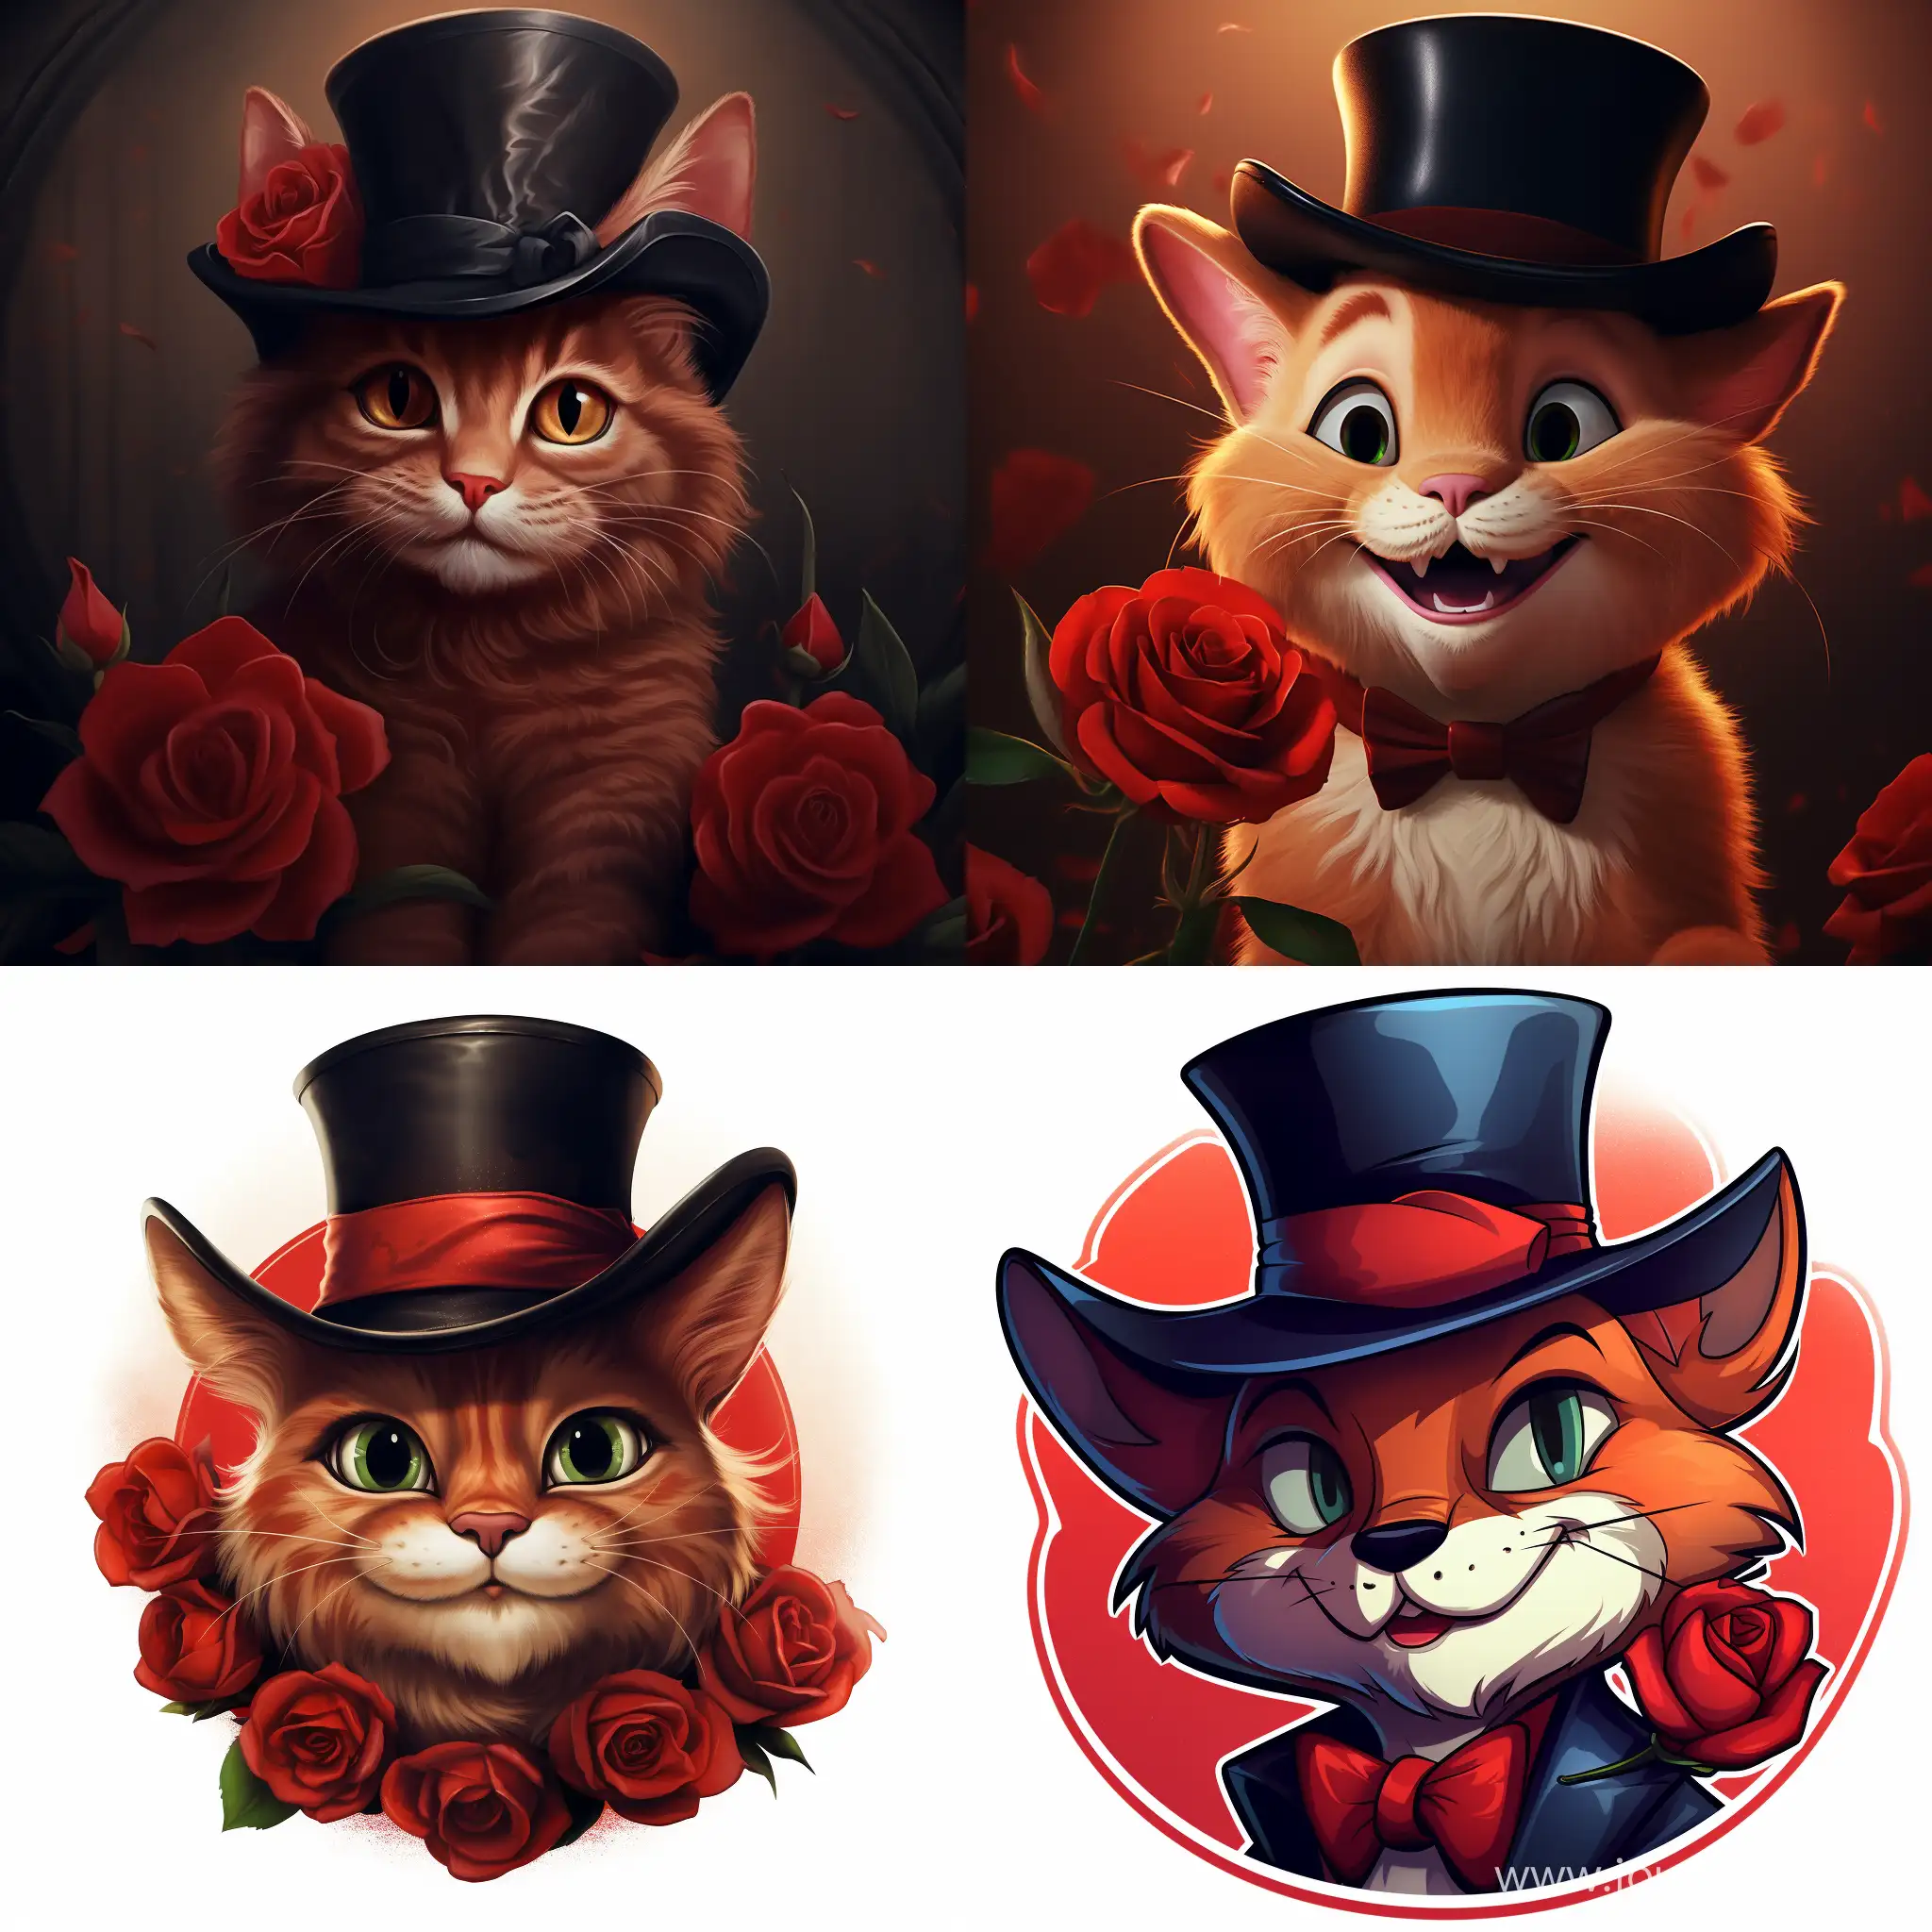 Adorable-Red-Cartoon-Cat-Wearing-a-Hat-with-a-Rose-in-Its-Teeth